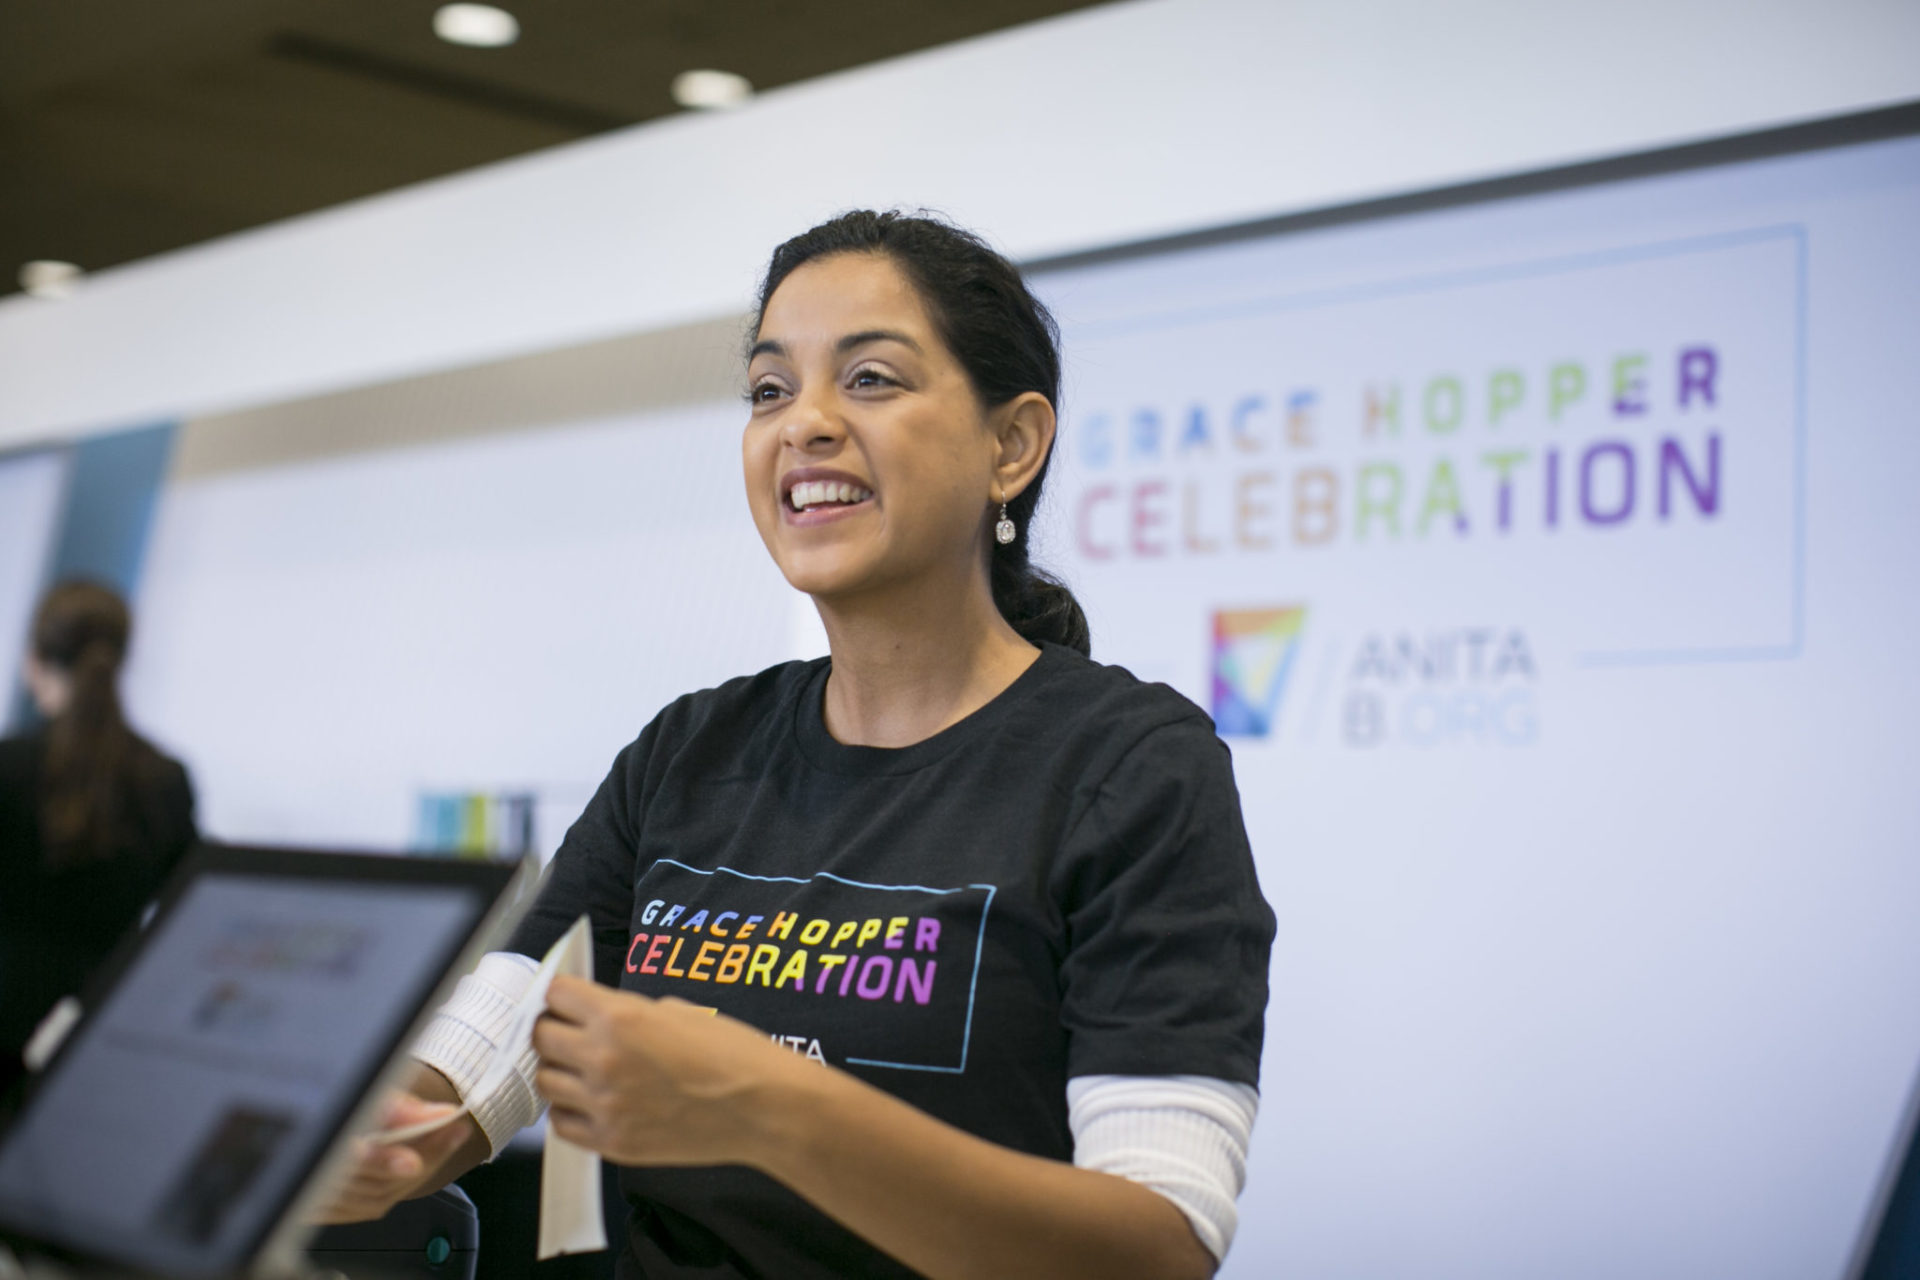 #GHC19 Registration Transfers and Resales